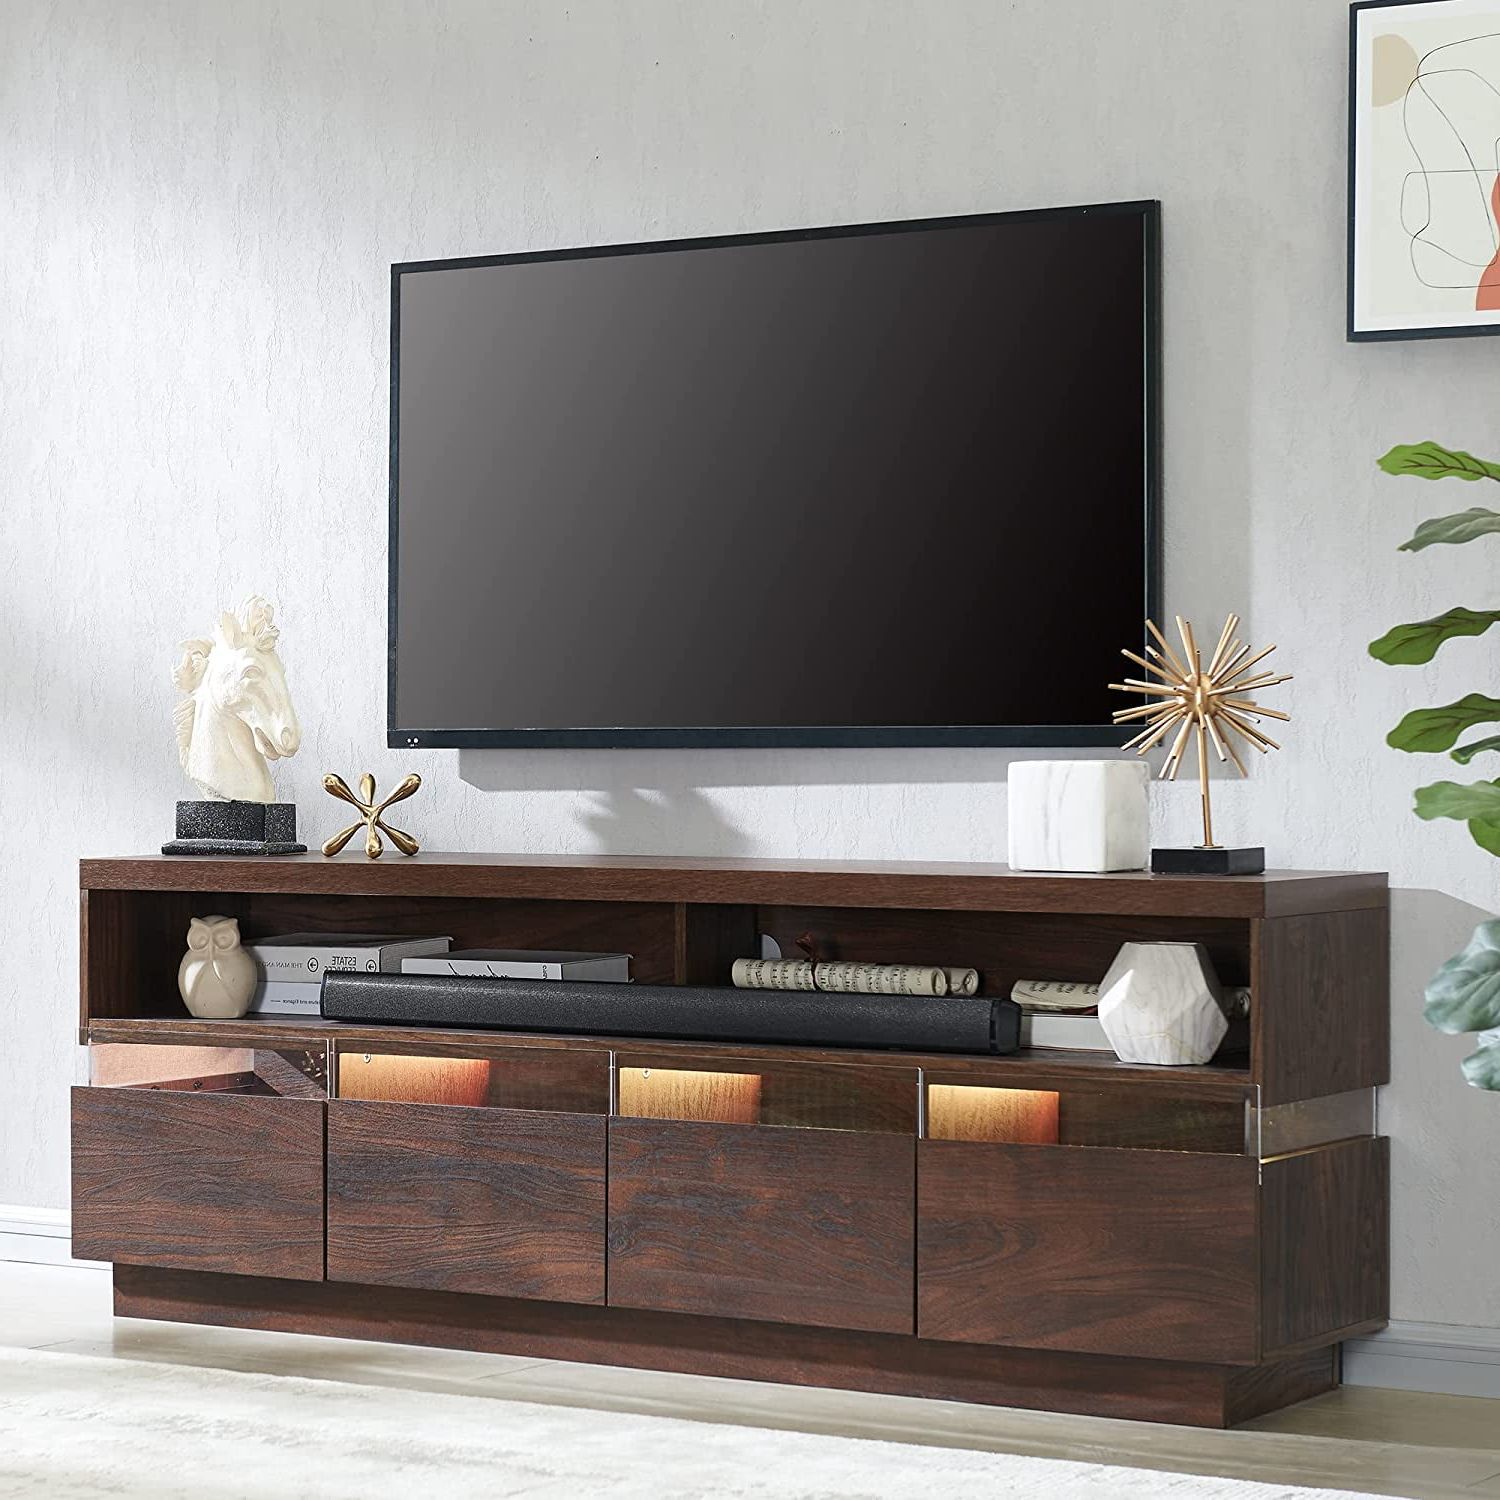 Okd Modern Wood Tv Stand For Tvs Up To 75" For Living Room With Led Lights Entertainment  Center,walnut – Walmart With Regard To Walnut Entertainment Centers (View 11 of 20)